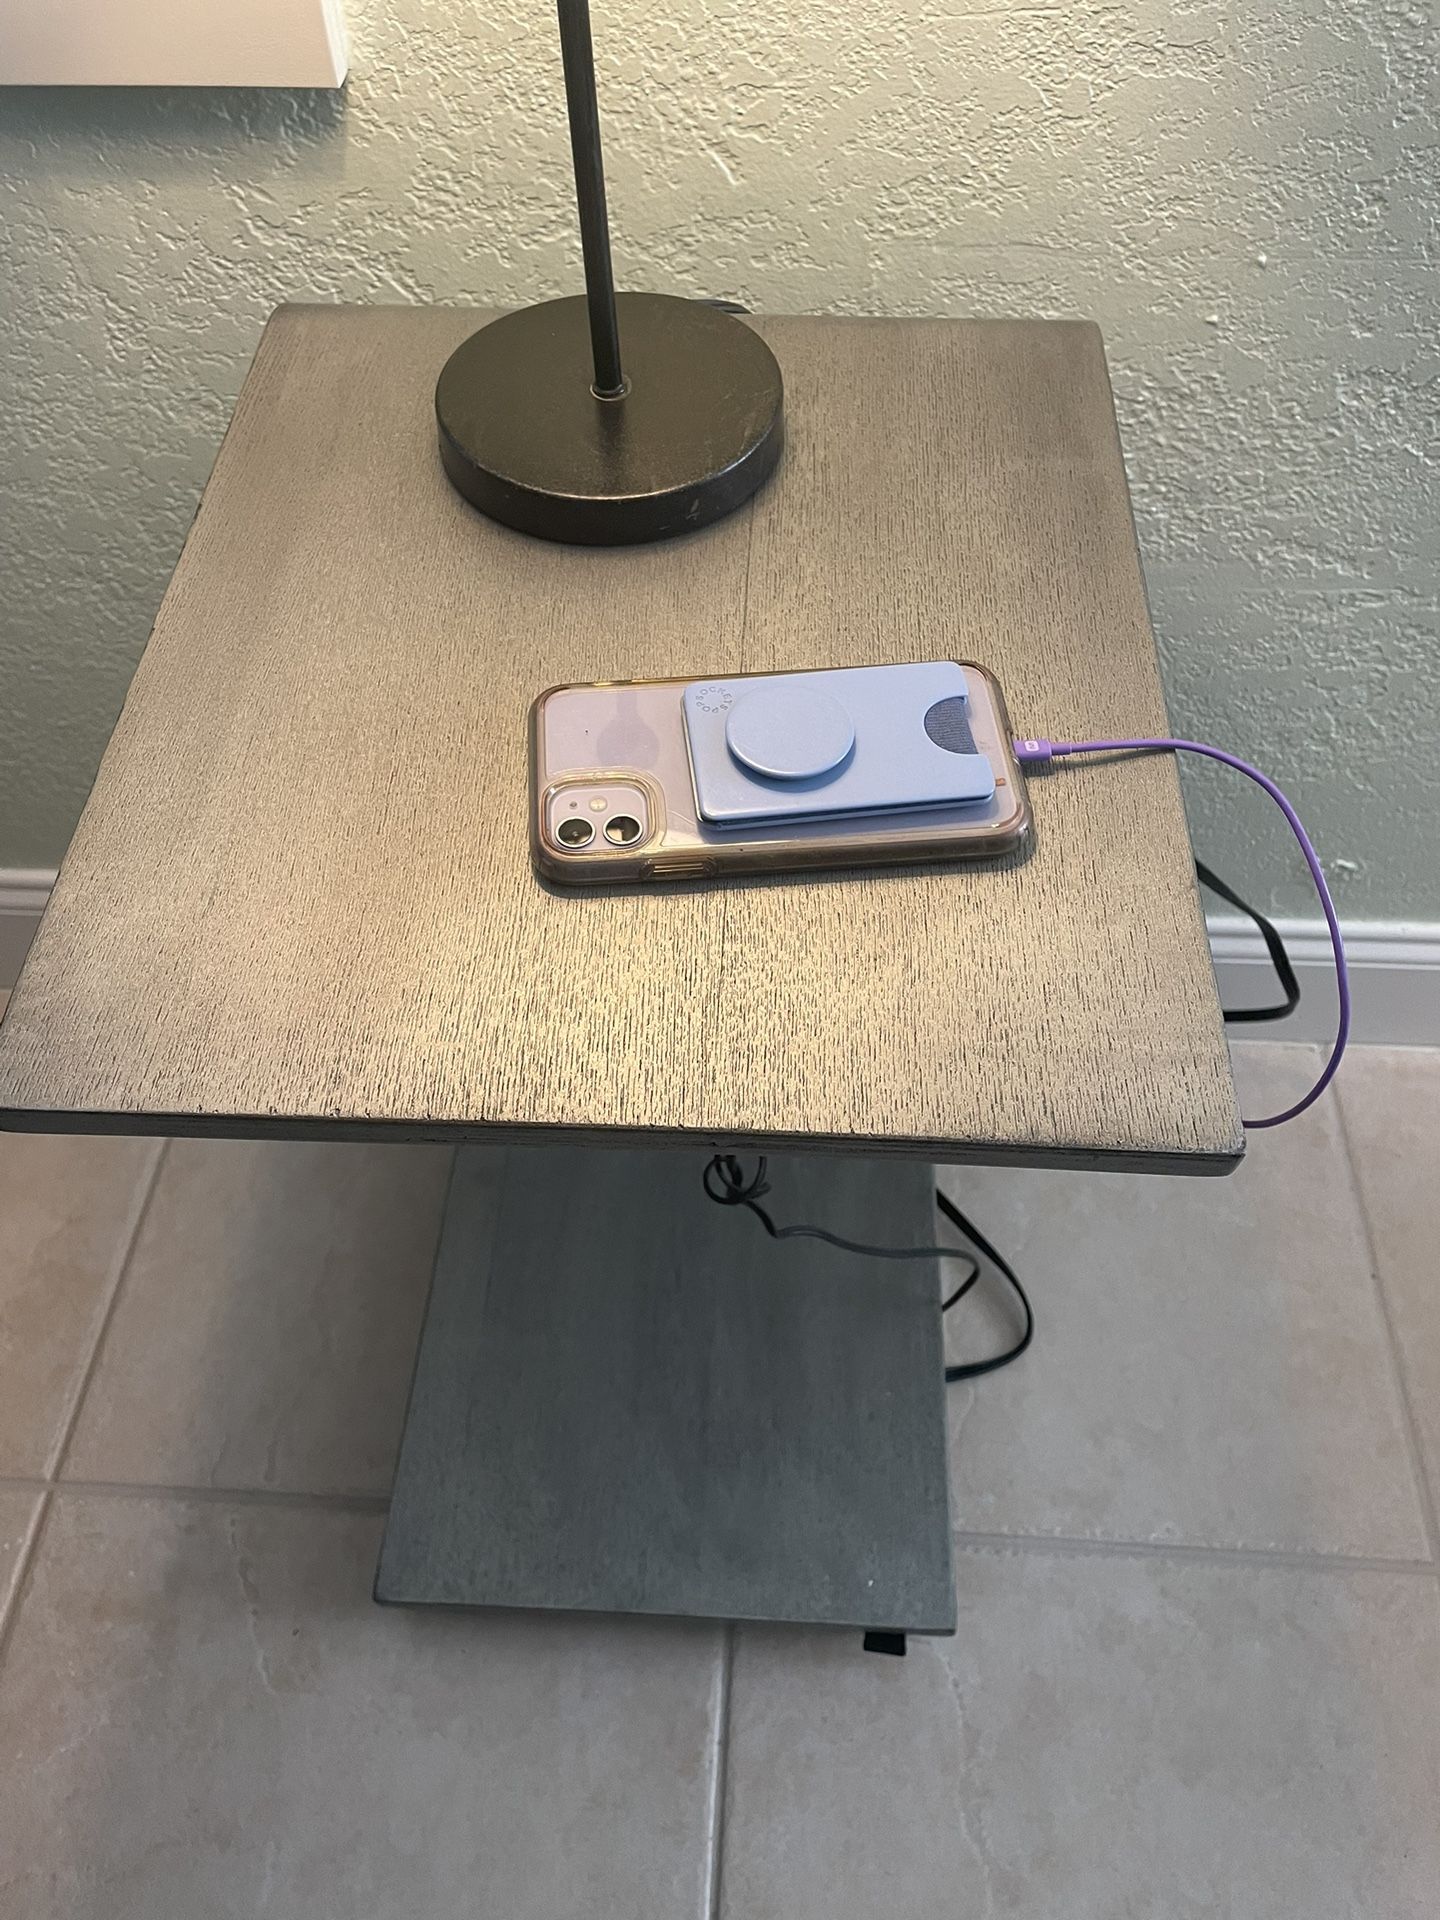 “C” Channel Side Table With USB & Electrical Plugs